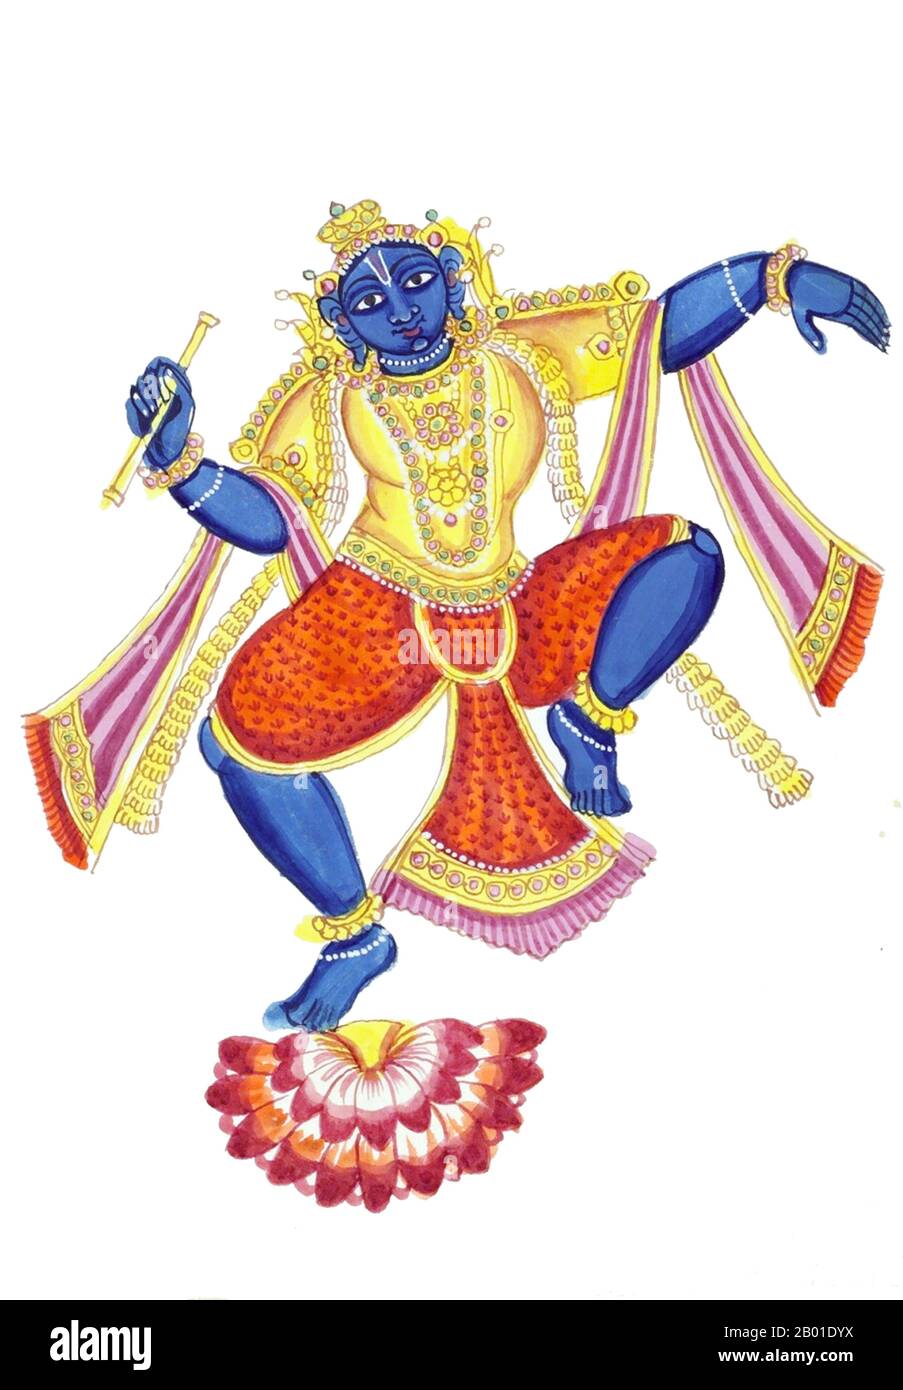 India: Krishna dancing on a lotus blossom. Gouache watercolour painting, Tiruchirappalli (Trichy), Tamil Nadu, 1825.  Krishna (literally 'dark, black, dark-blue') is a central figure of Hinduism and is traditionally attributed the authorship of the Bhagavad Gita. He is an Avatar of Vishnu and considered in some monotheistic traditions as the Supreme Being. Krishna is identified as a historical individual who participated in the events of the Mahābhārata.  Krishna is often described as an infant or young boy playing a flute as in the Bhagavata Purana, or as a youthful prince giving direction. Stock Photo